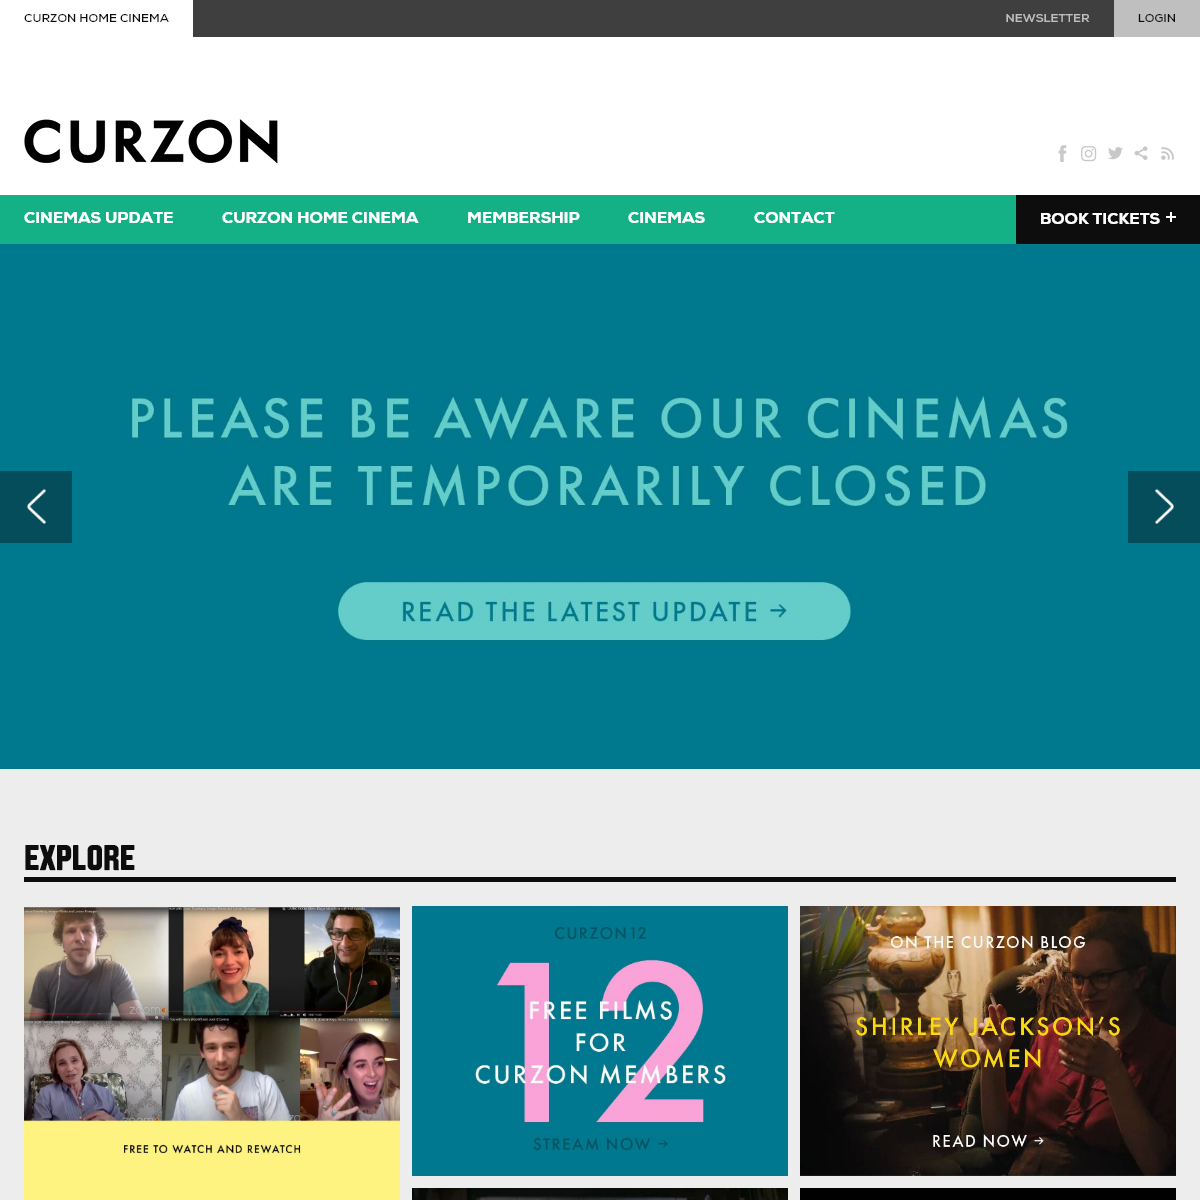 A complete backup of curzoncinemas.com